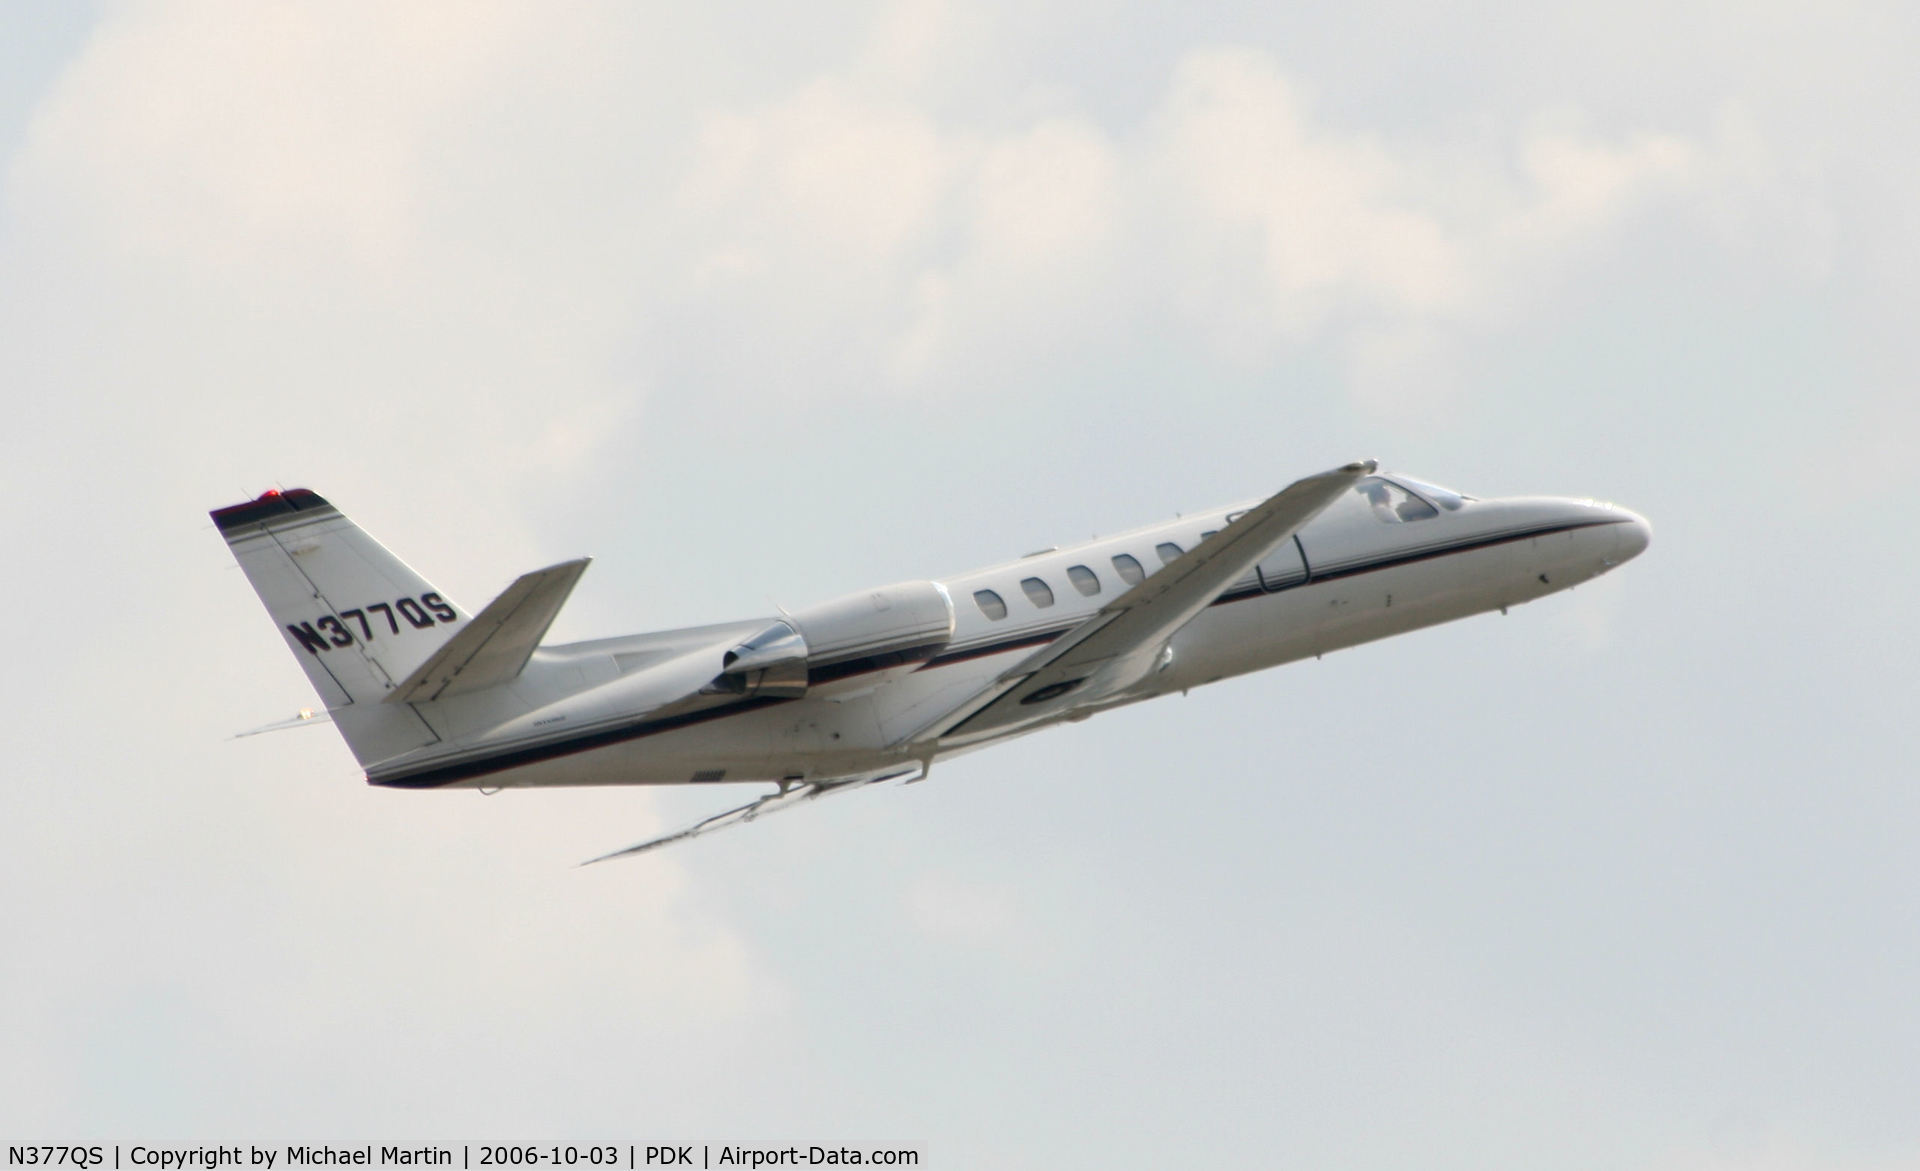 N377QS, 2008 Cessna 680 Citation Sovereign C/N 680-0187, Departing PDK enroute to RUQ